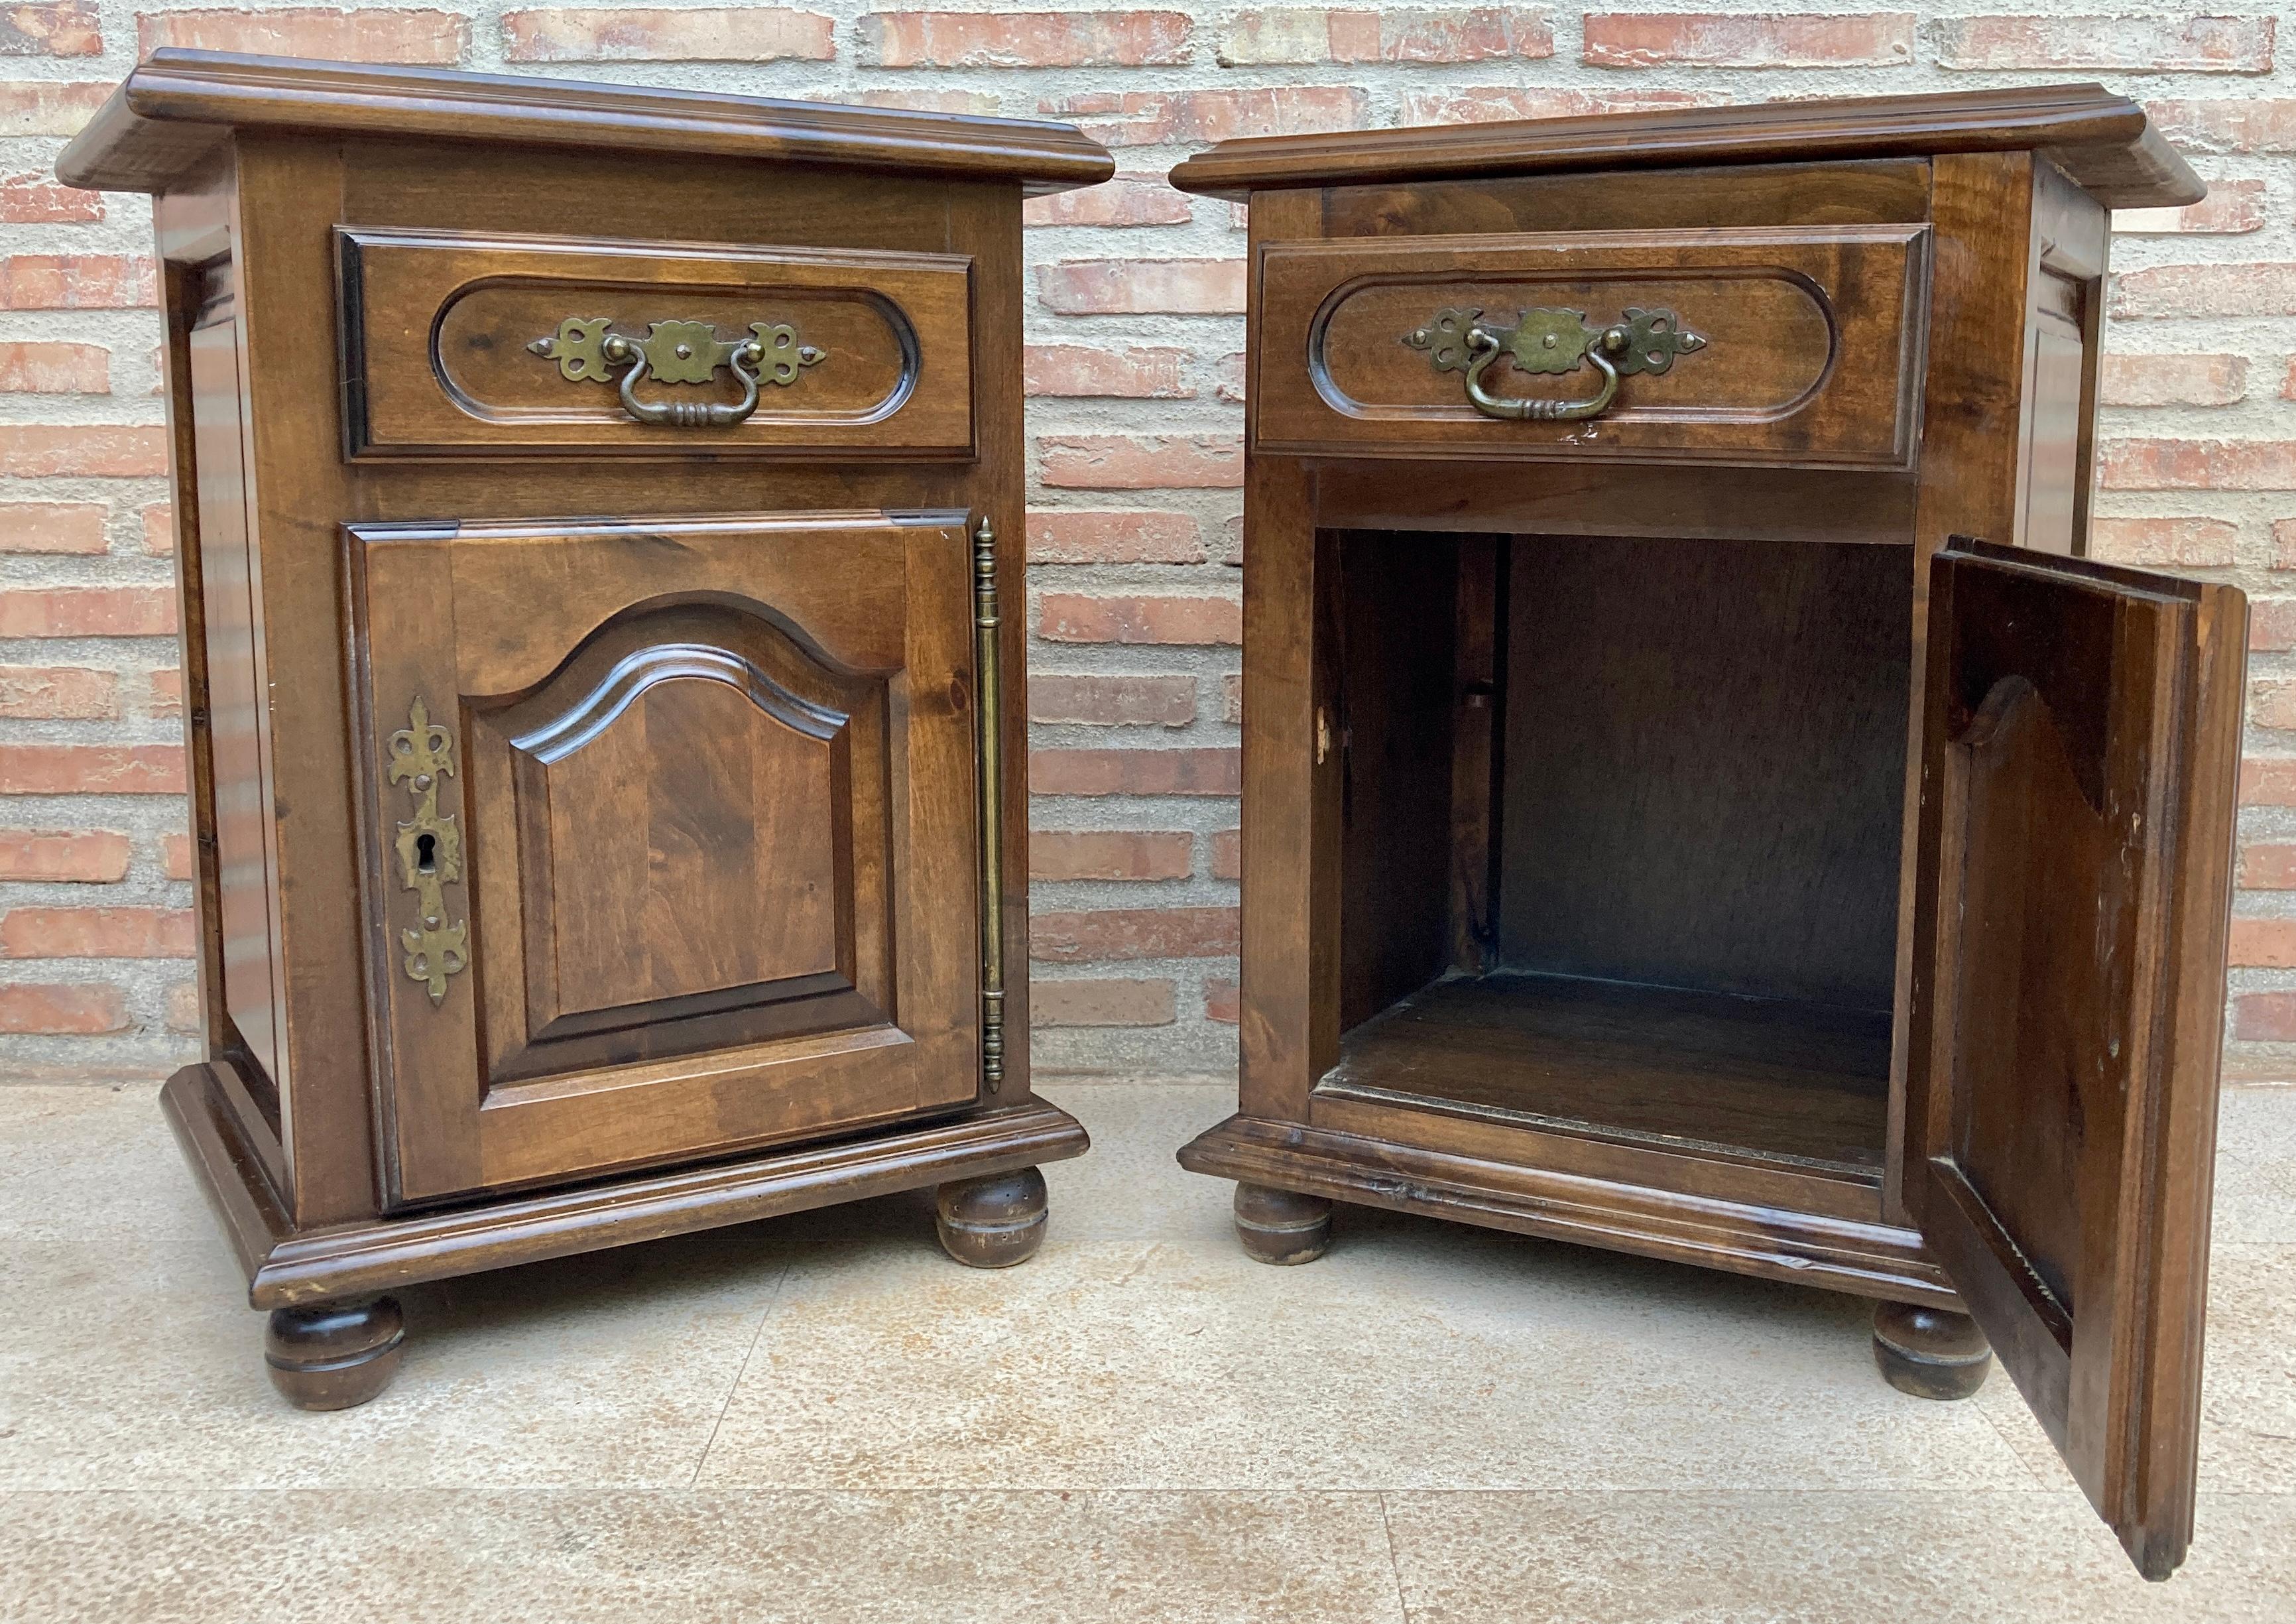 20th century pair of Spanish nightstands with one carved drawer, one door and bronze hardware.
Beautiful tables that you can use like a night stands or side tables, end tables... or table lamp.